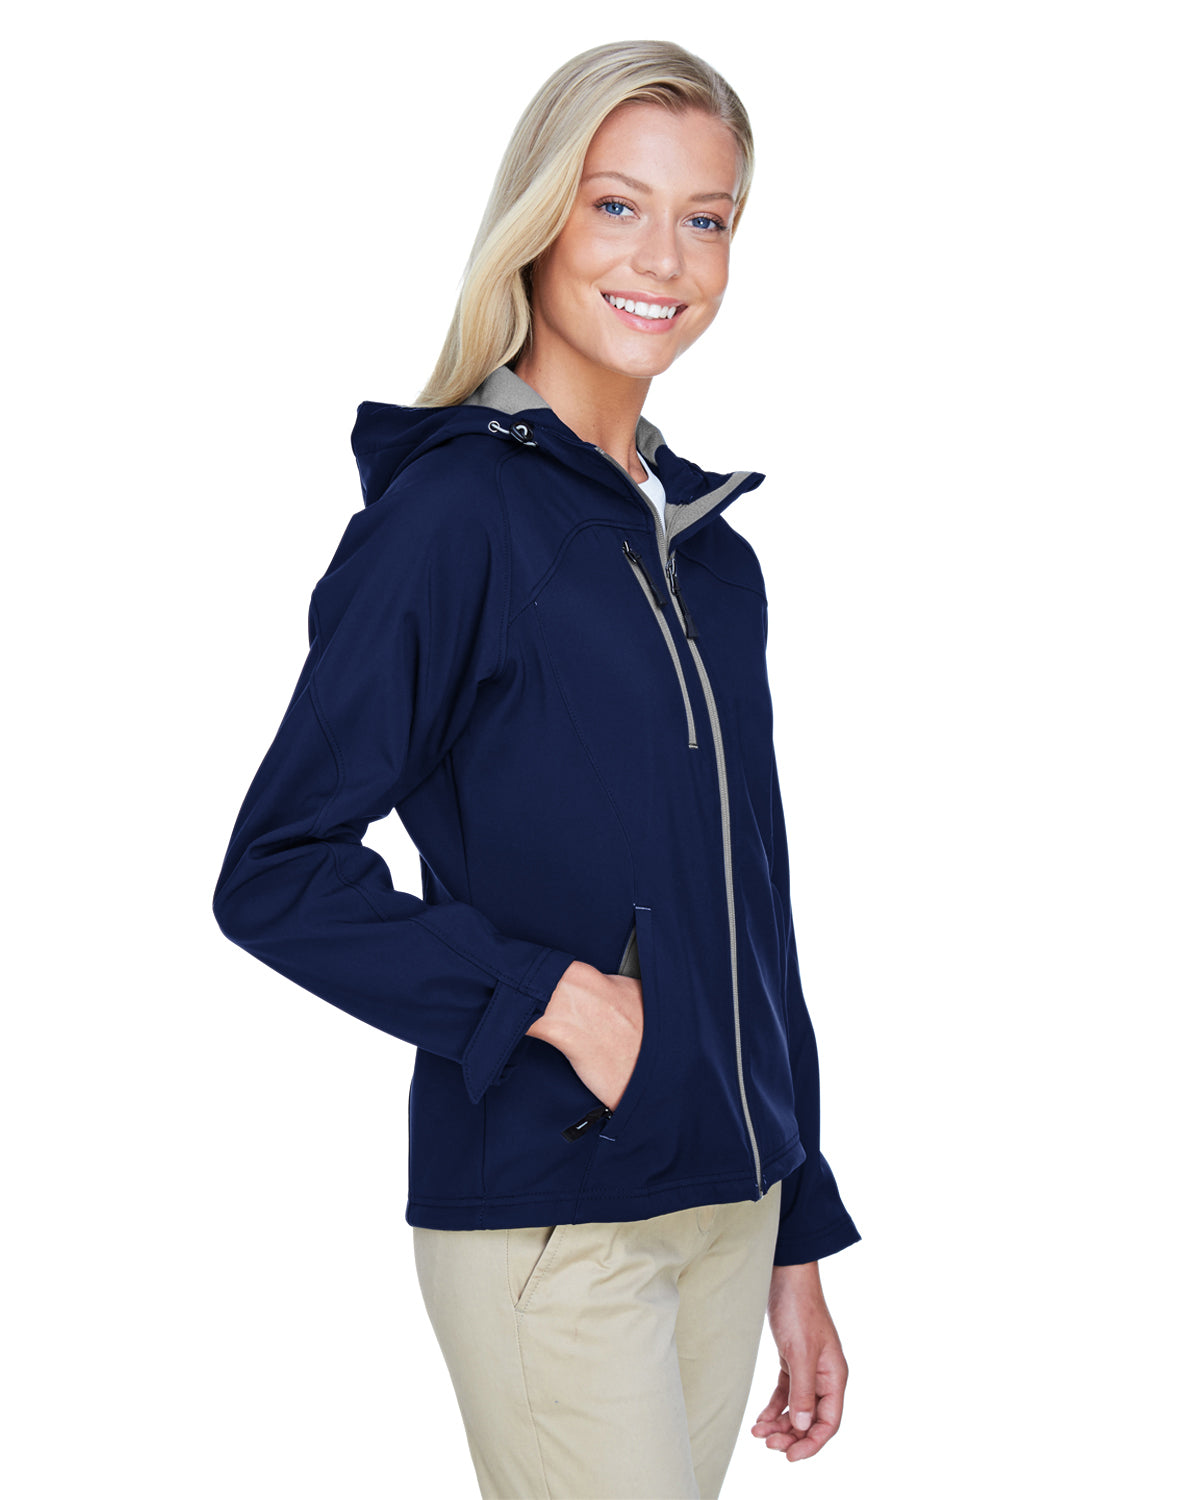 Ash City® North End Ladies' Prospect Two-Layer Fleece Bonded Soft Shell Hooded Jacket